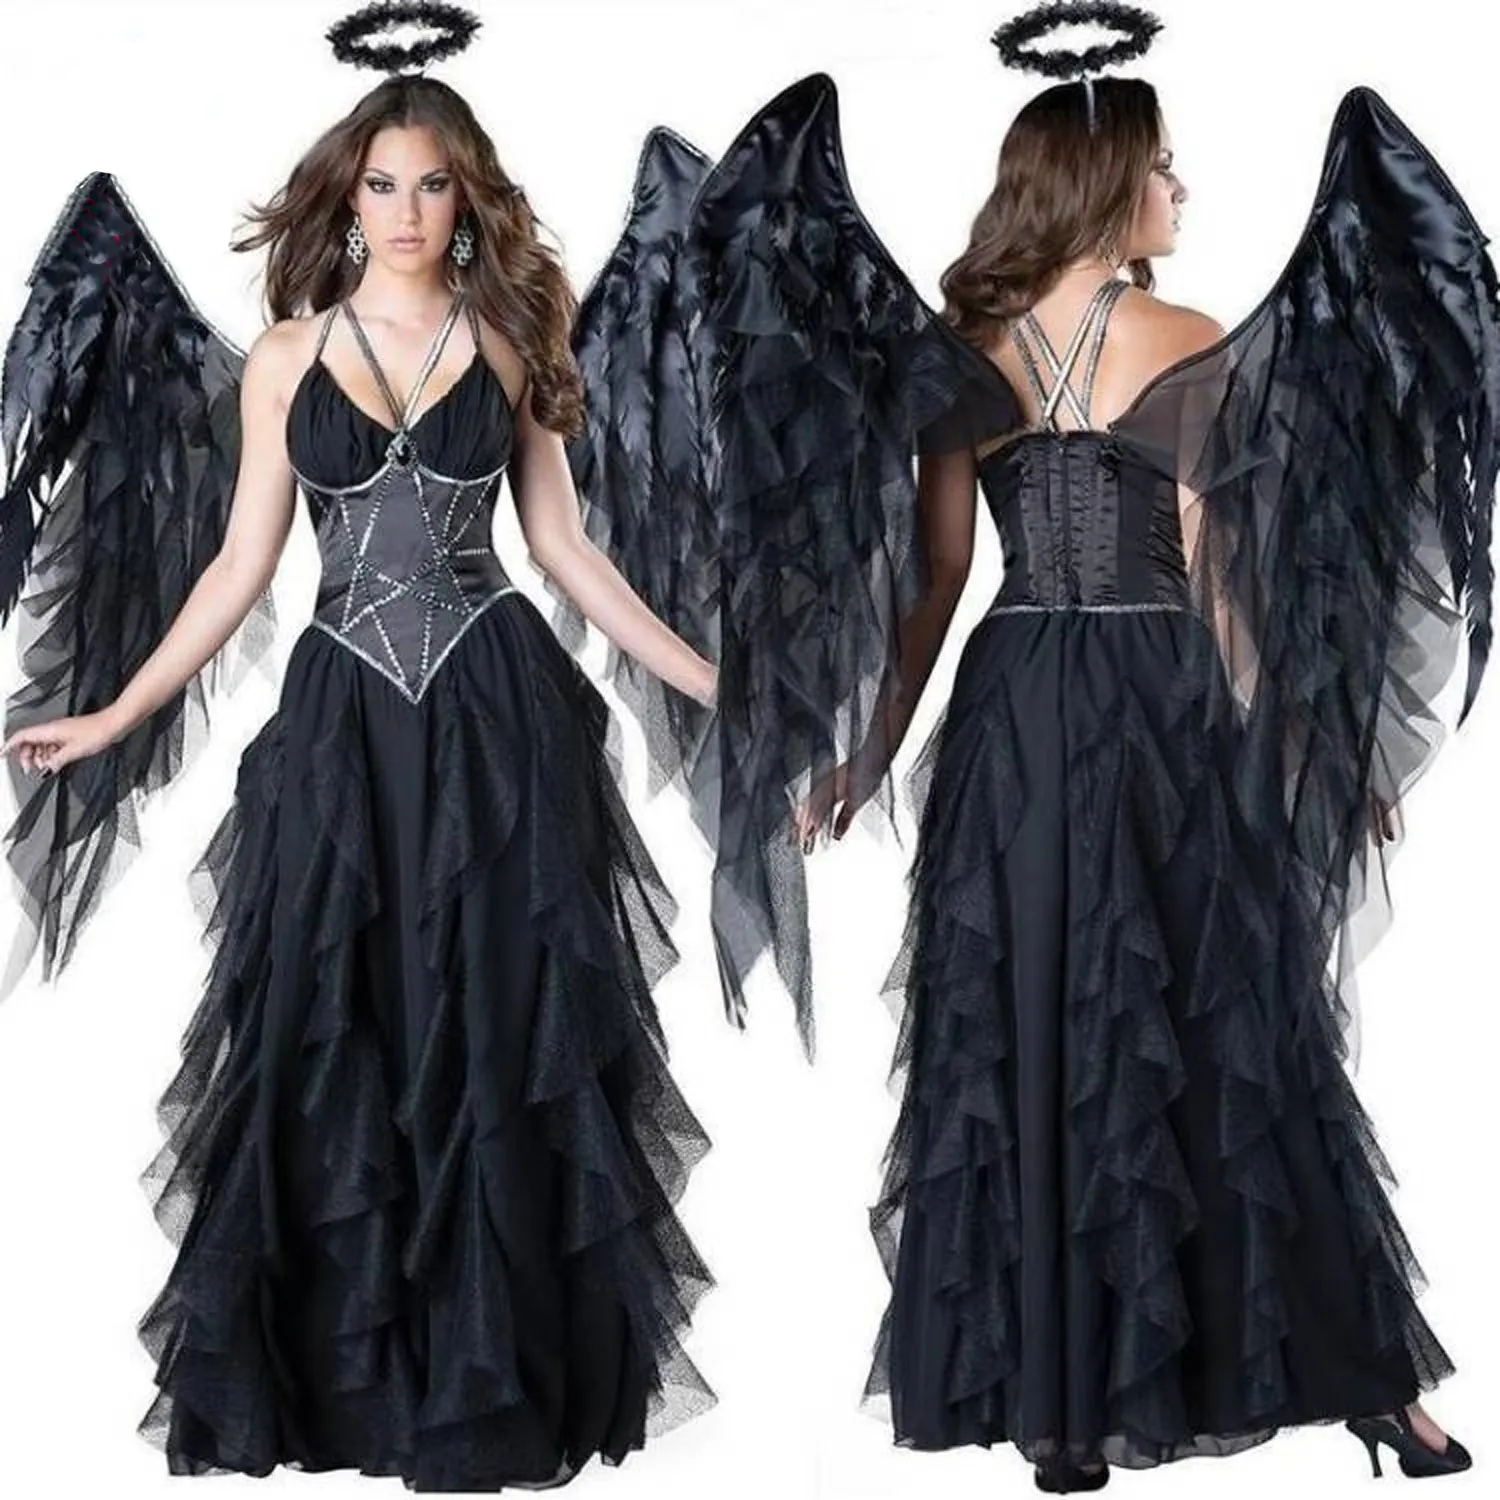 2022 New Halloween Party Dark Sexy Angel Costume with Wings Black Angel Costume Stage Performance Suit